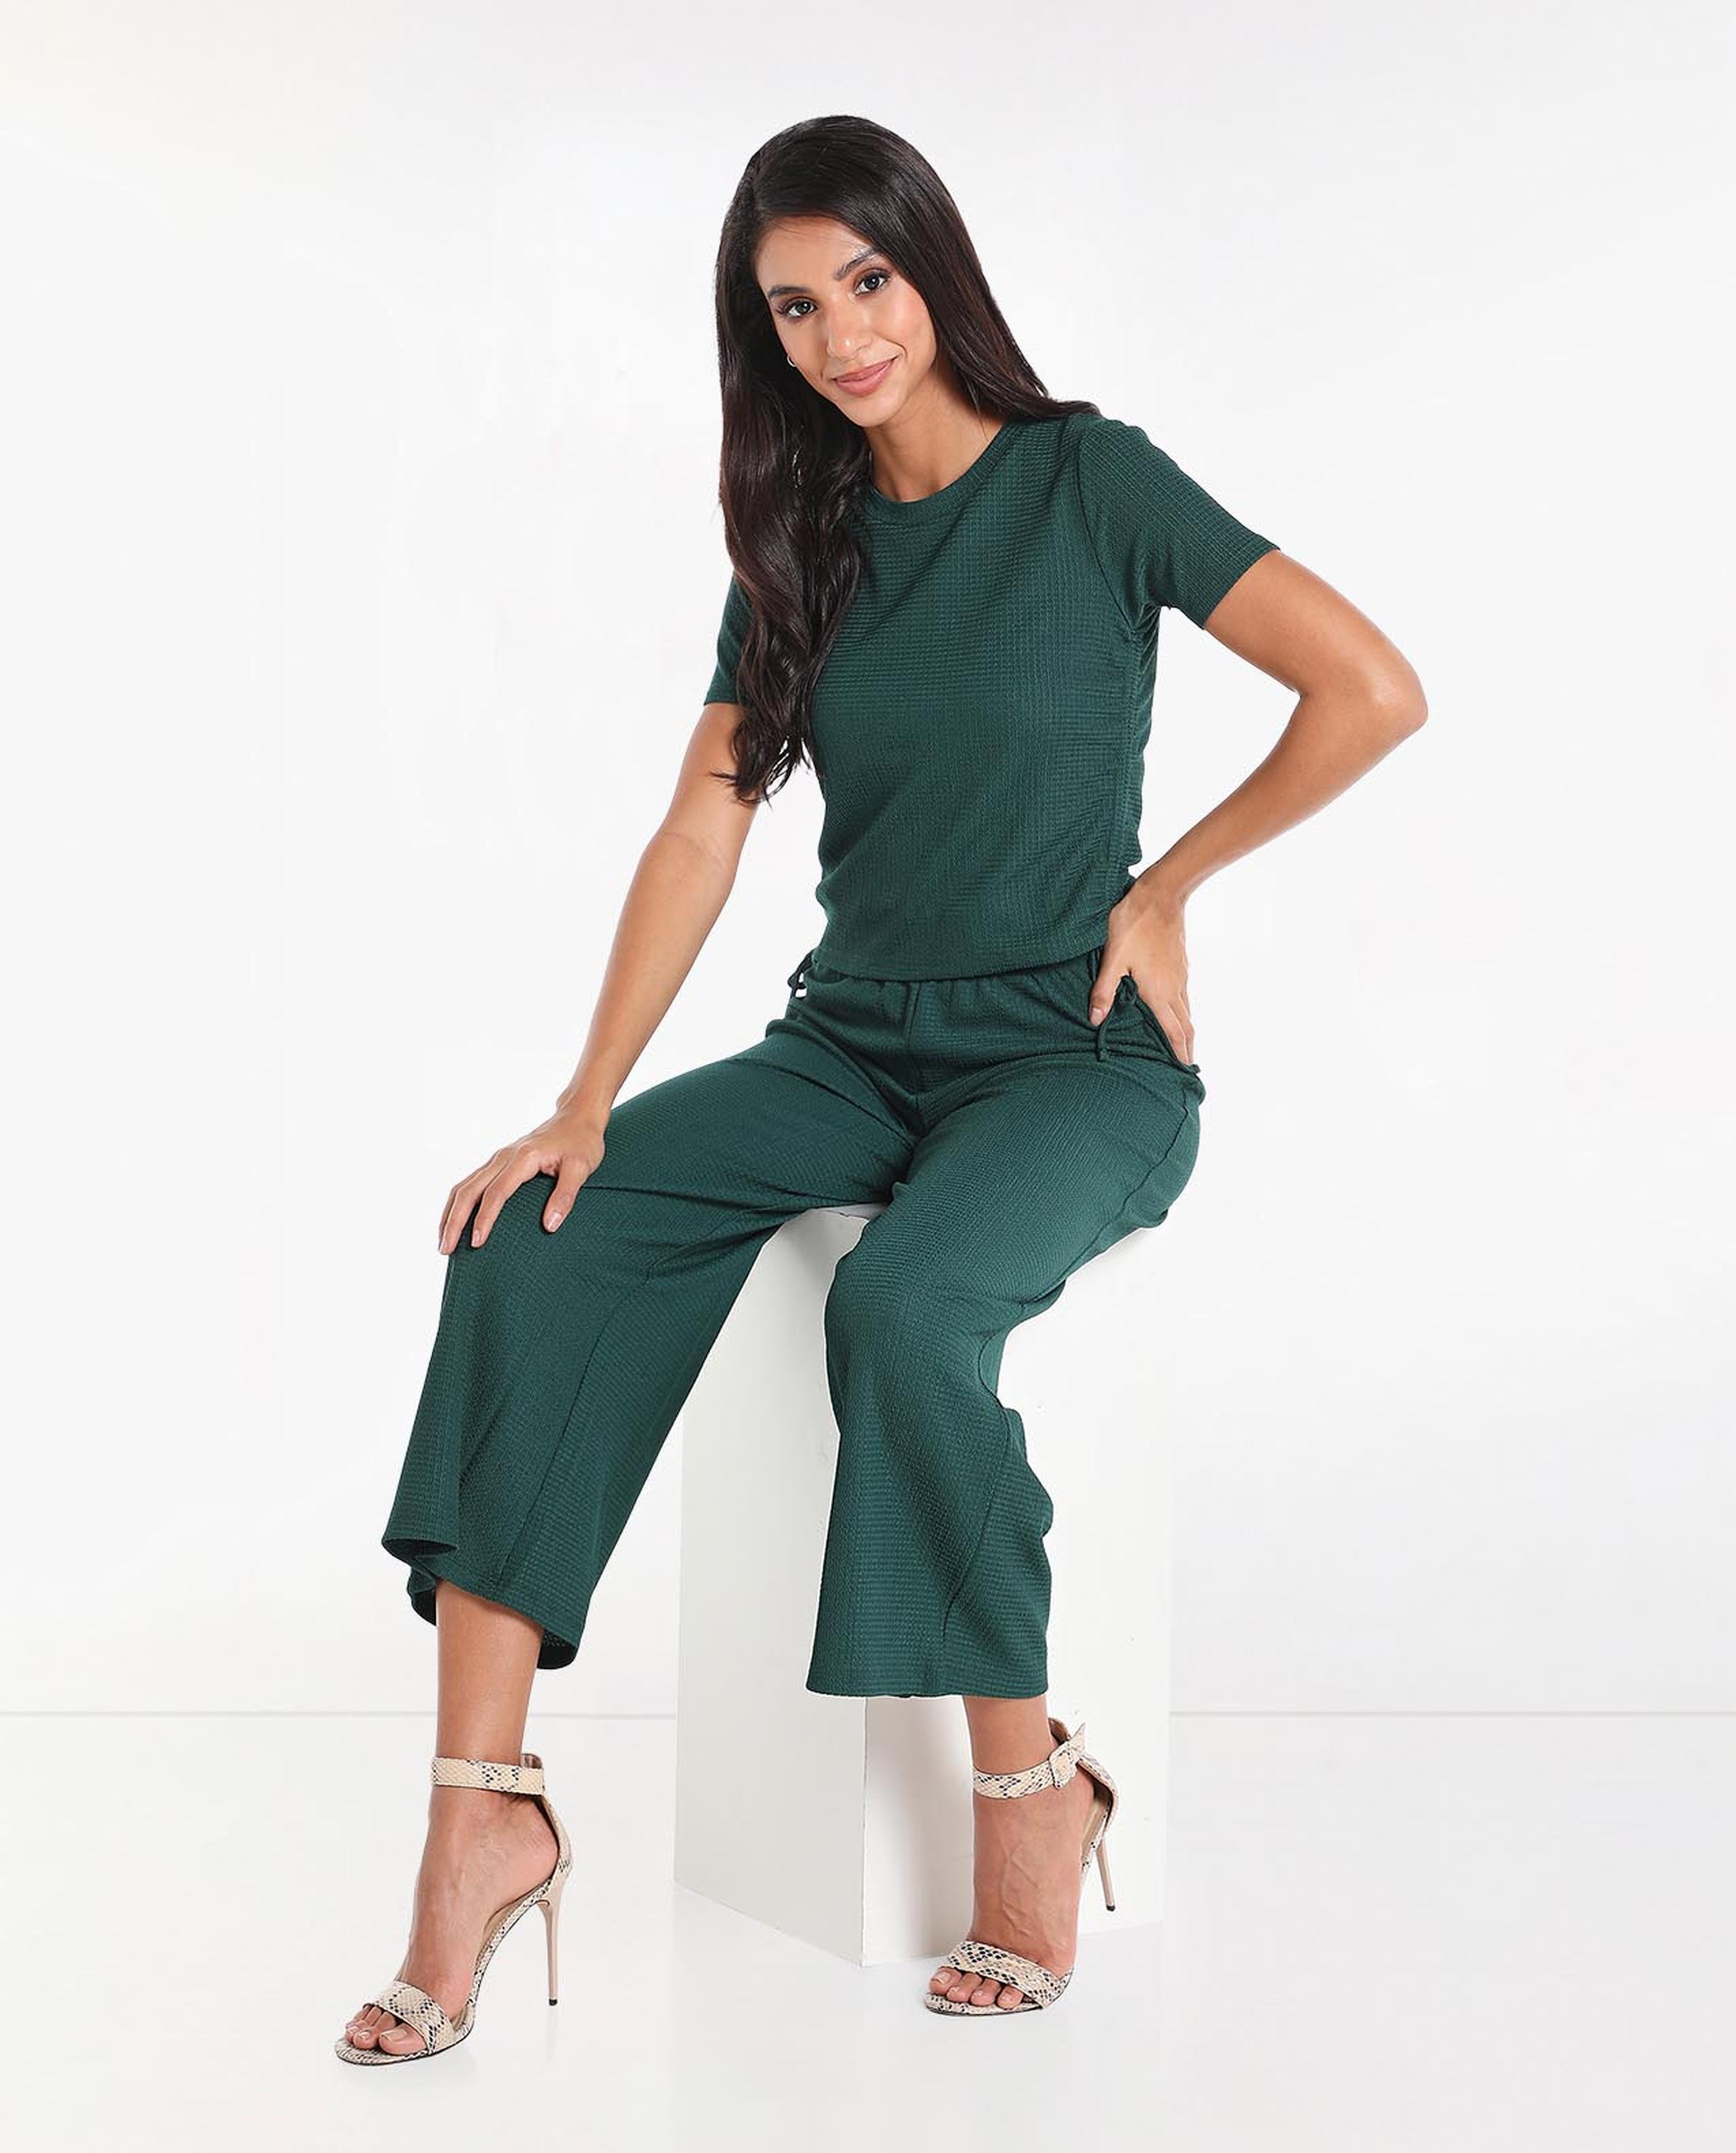 Solid Mid-Rise Culottes with Slip-On Closure